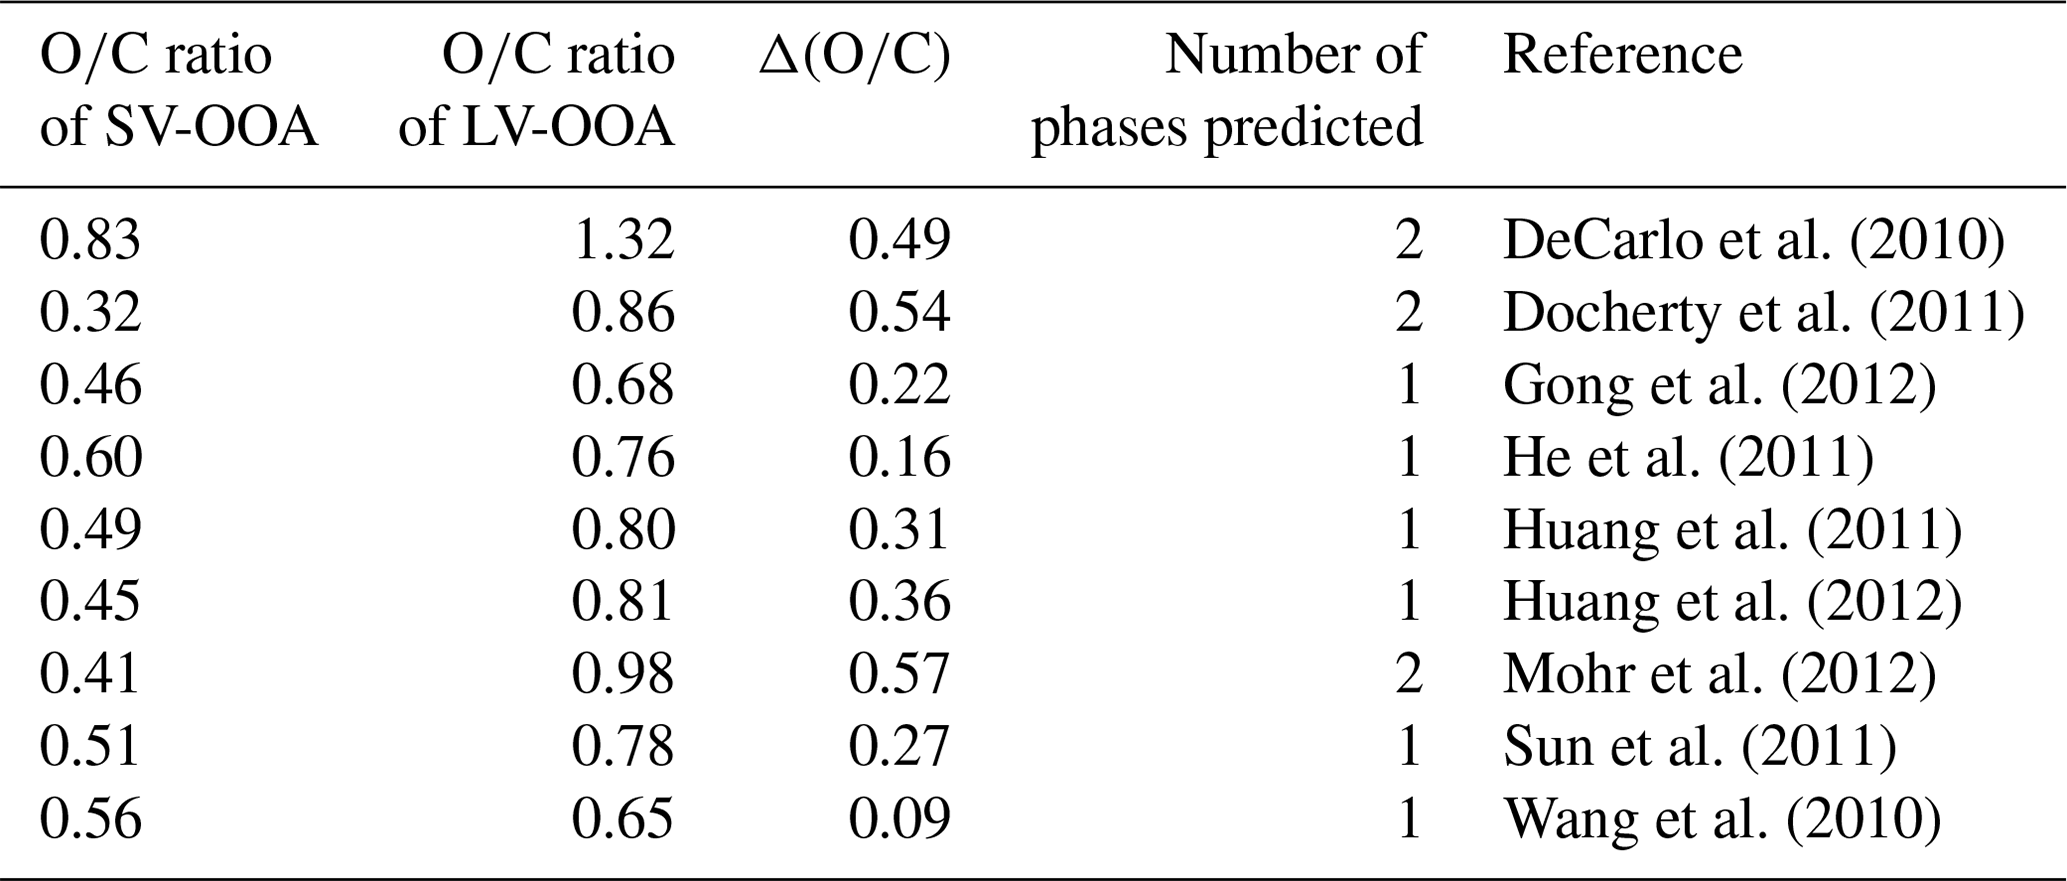 ACP - Not all types of secondary organic aerosol mix: two phases observed  when mixing different secondary organic aerosol types